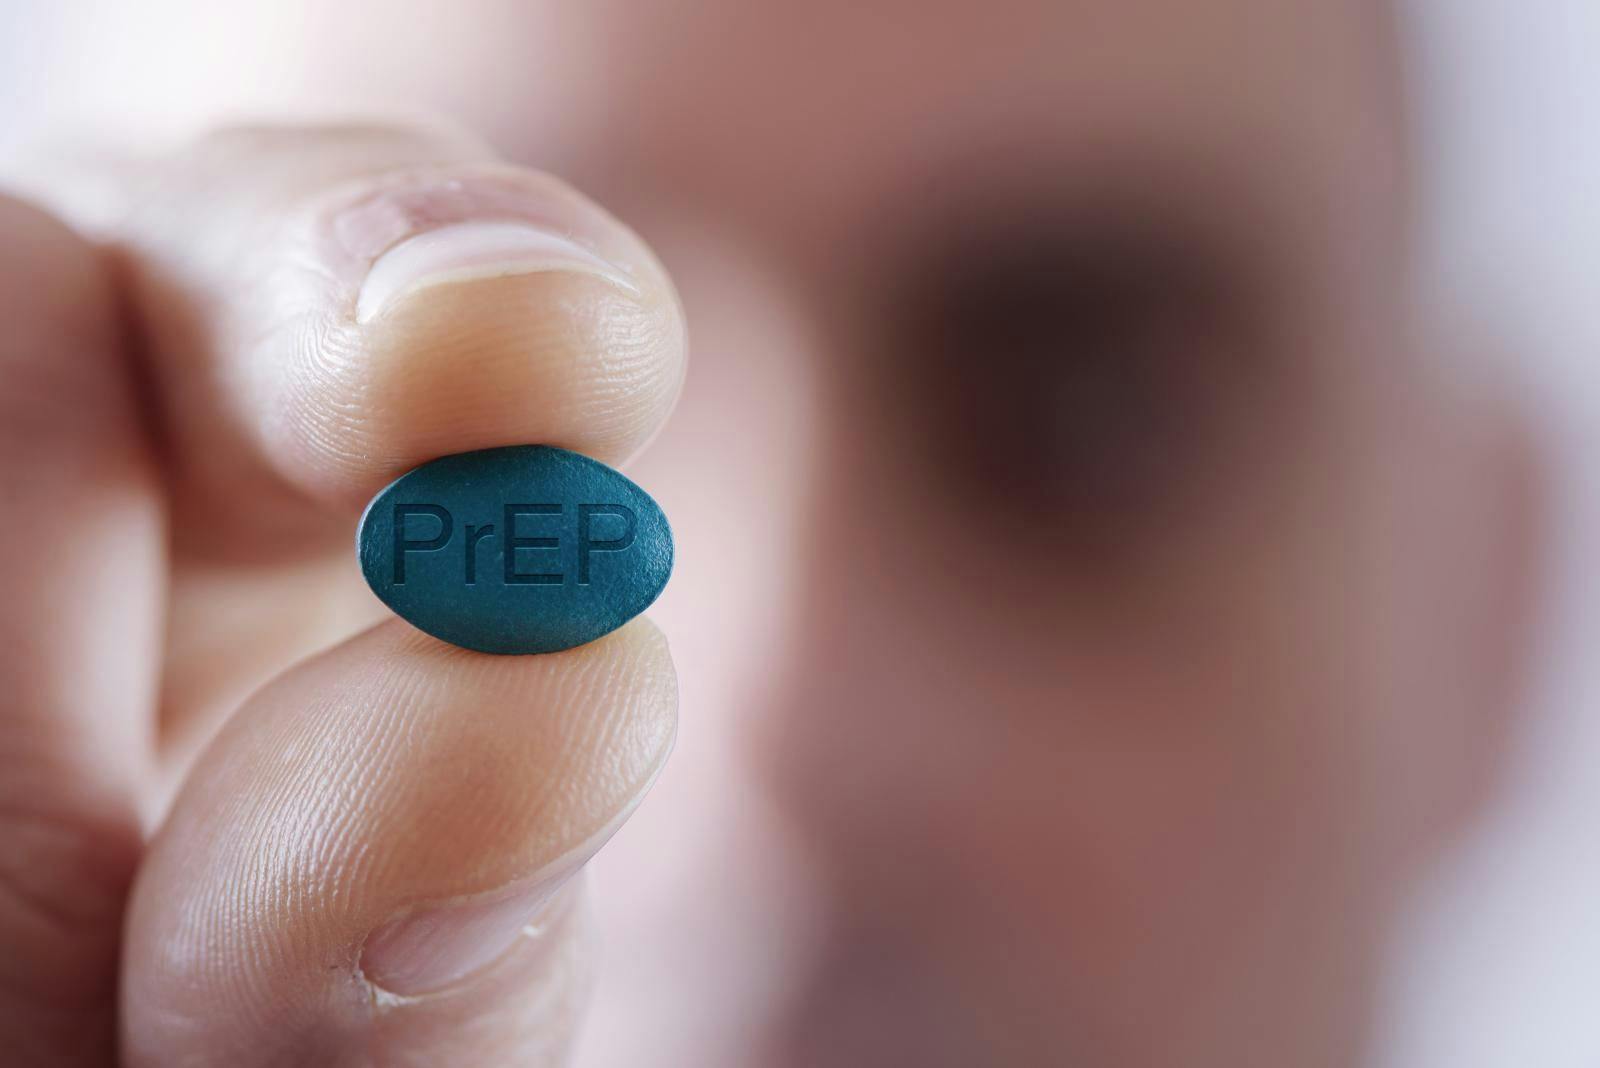 Trending News Today: PrEP Use Among Urban MSM Increasing, But Many Still Lack Access